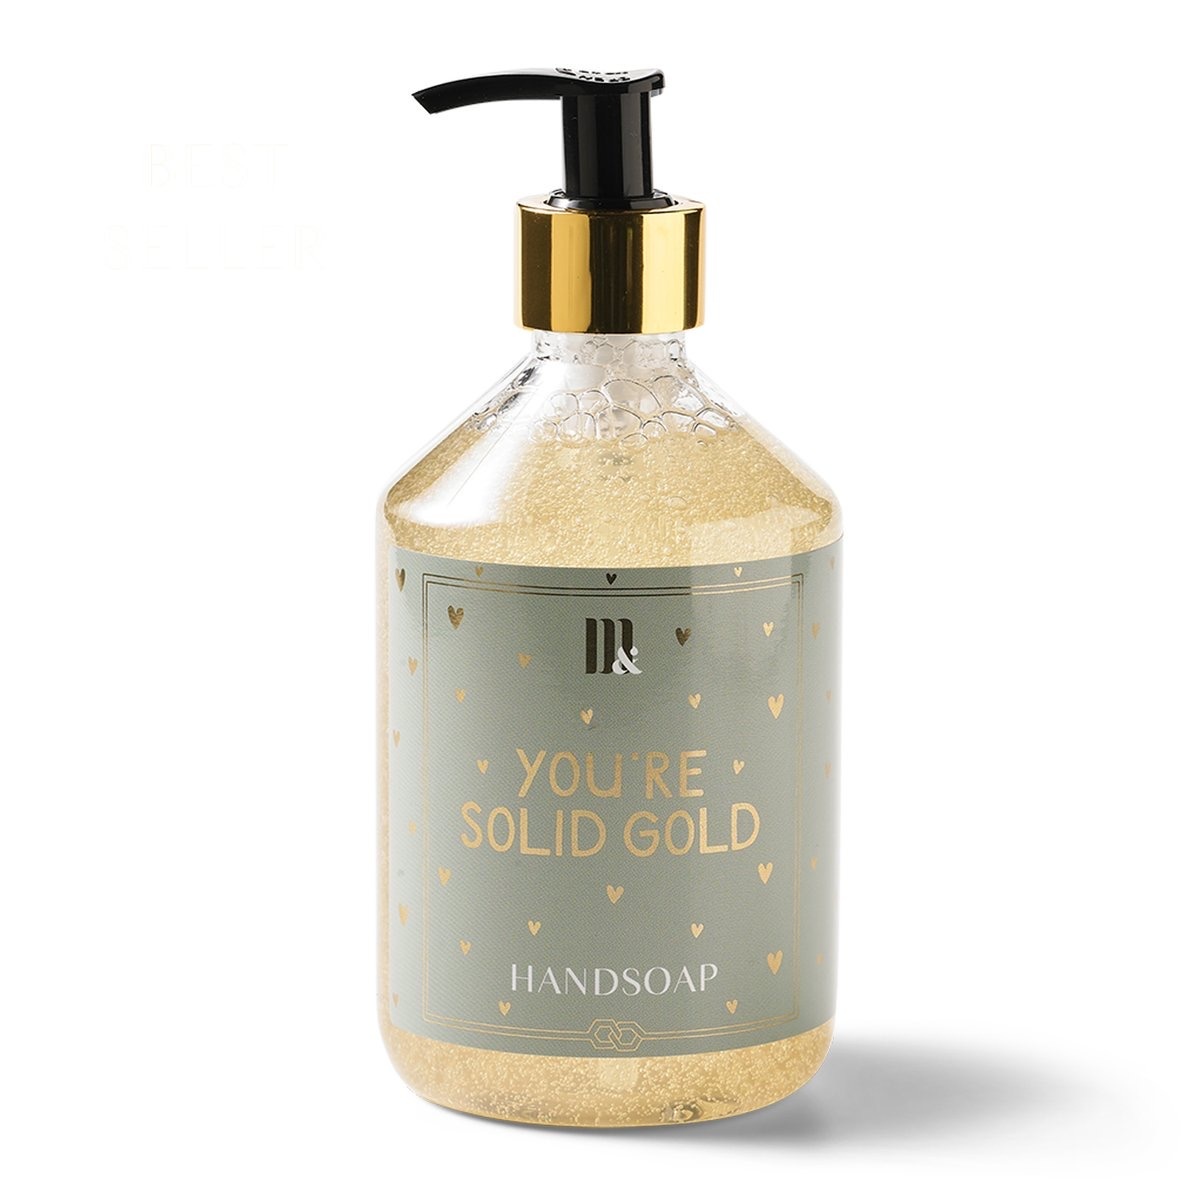 Hand soap - You’re Solid Gold